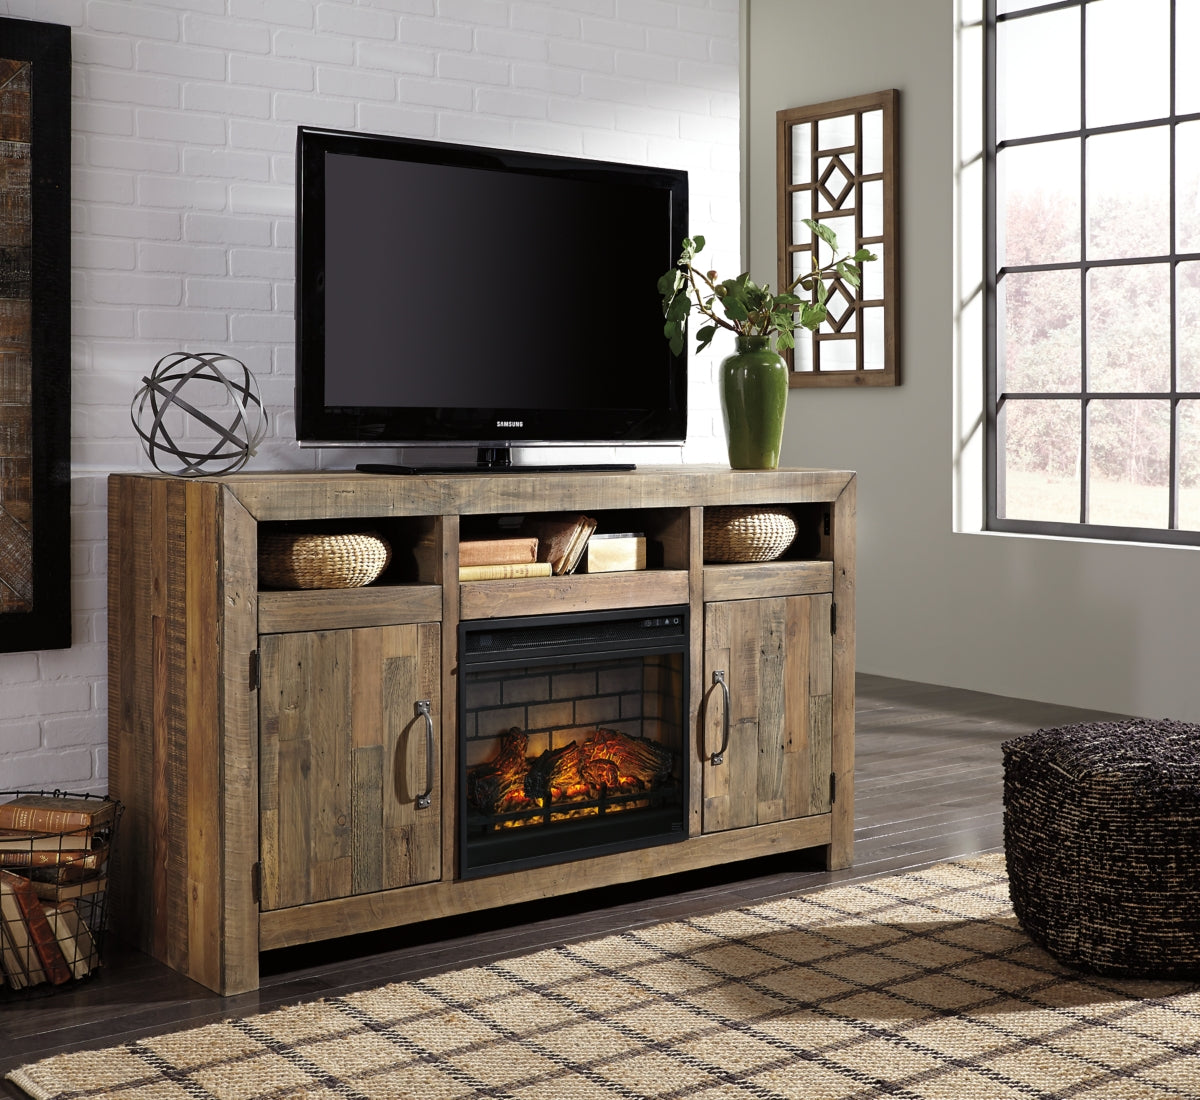 Sommerford 62" TV Stand with Electric Fireplace - W775W4